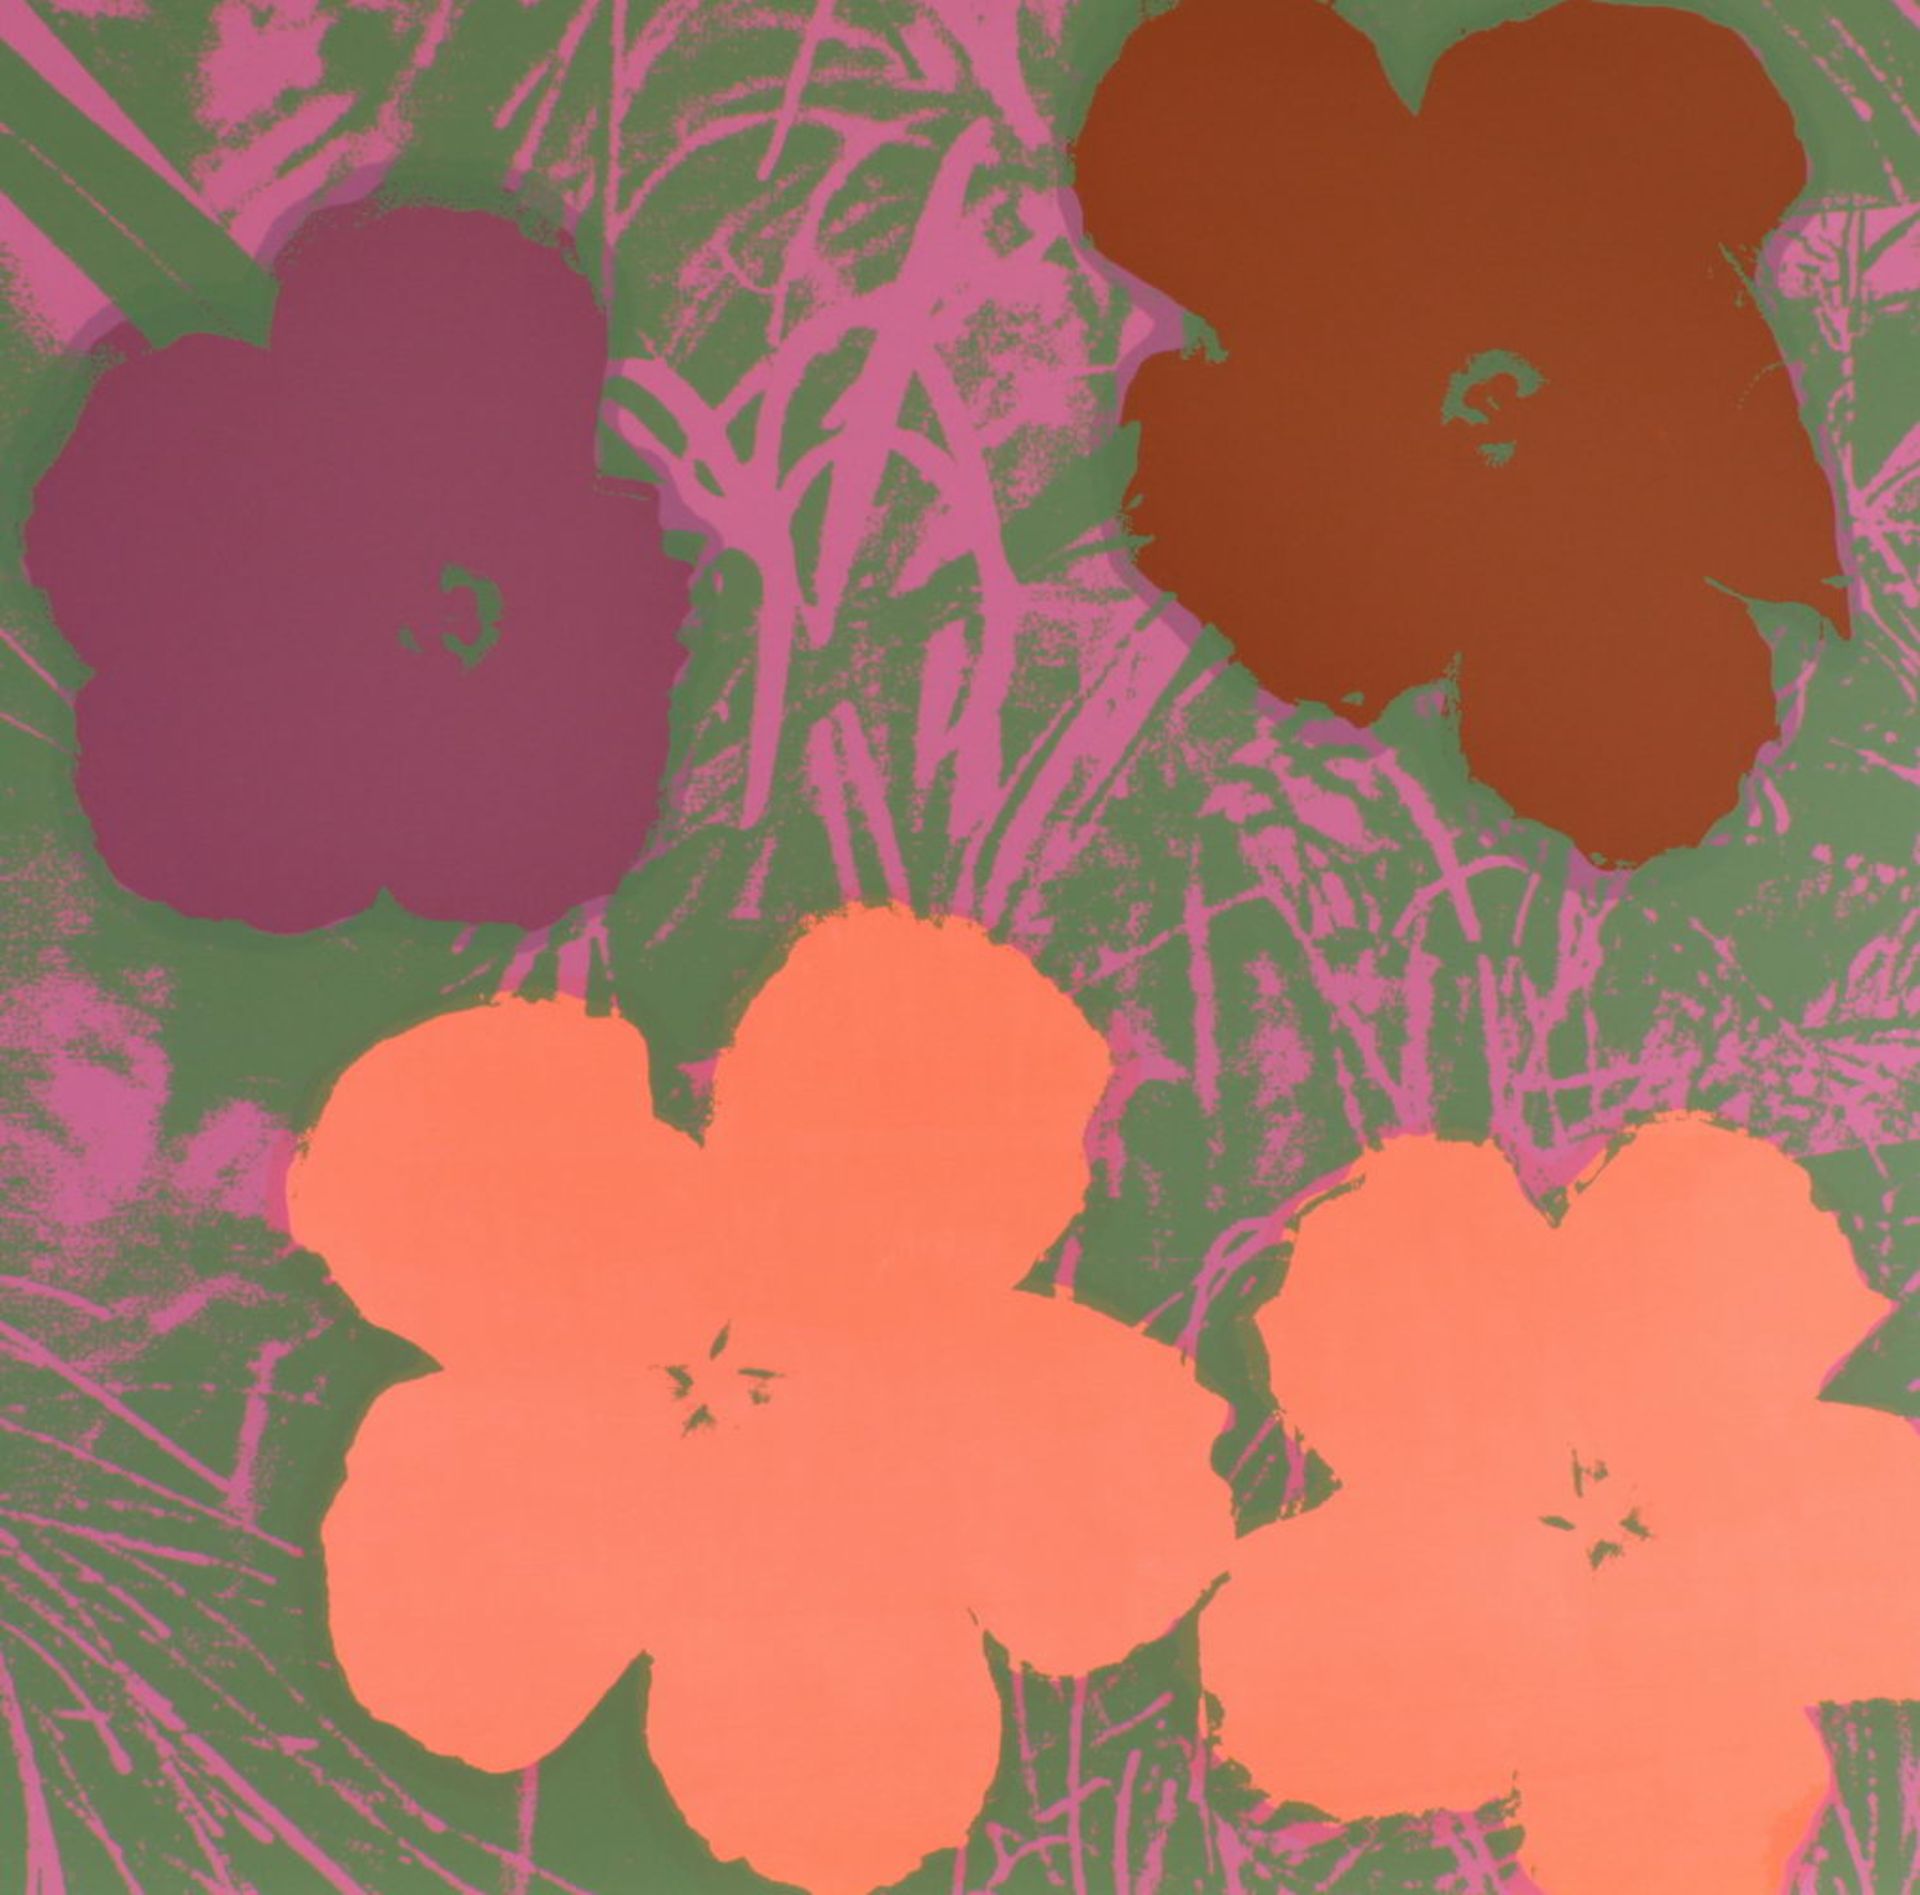 Warhol, Andy (1928 Pittsburgh - 1987 New York), 10 Farbserigrafien, "Flowers", published by Sunday - Image 4 of 10